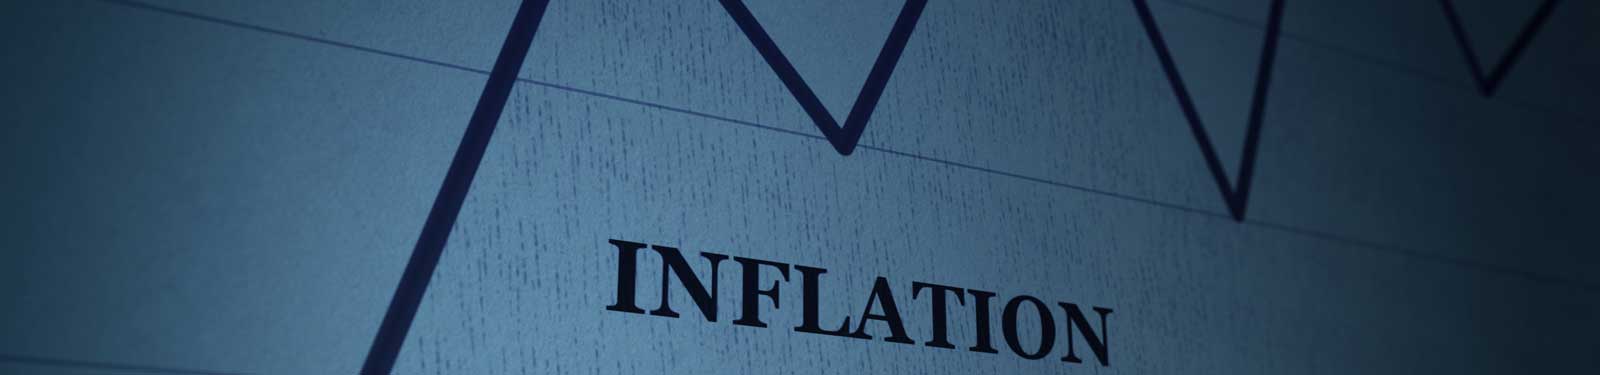 What You Need to Know About Inflation